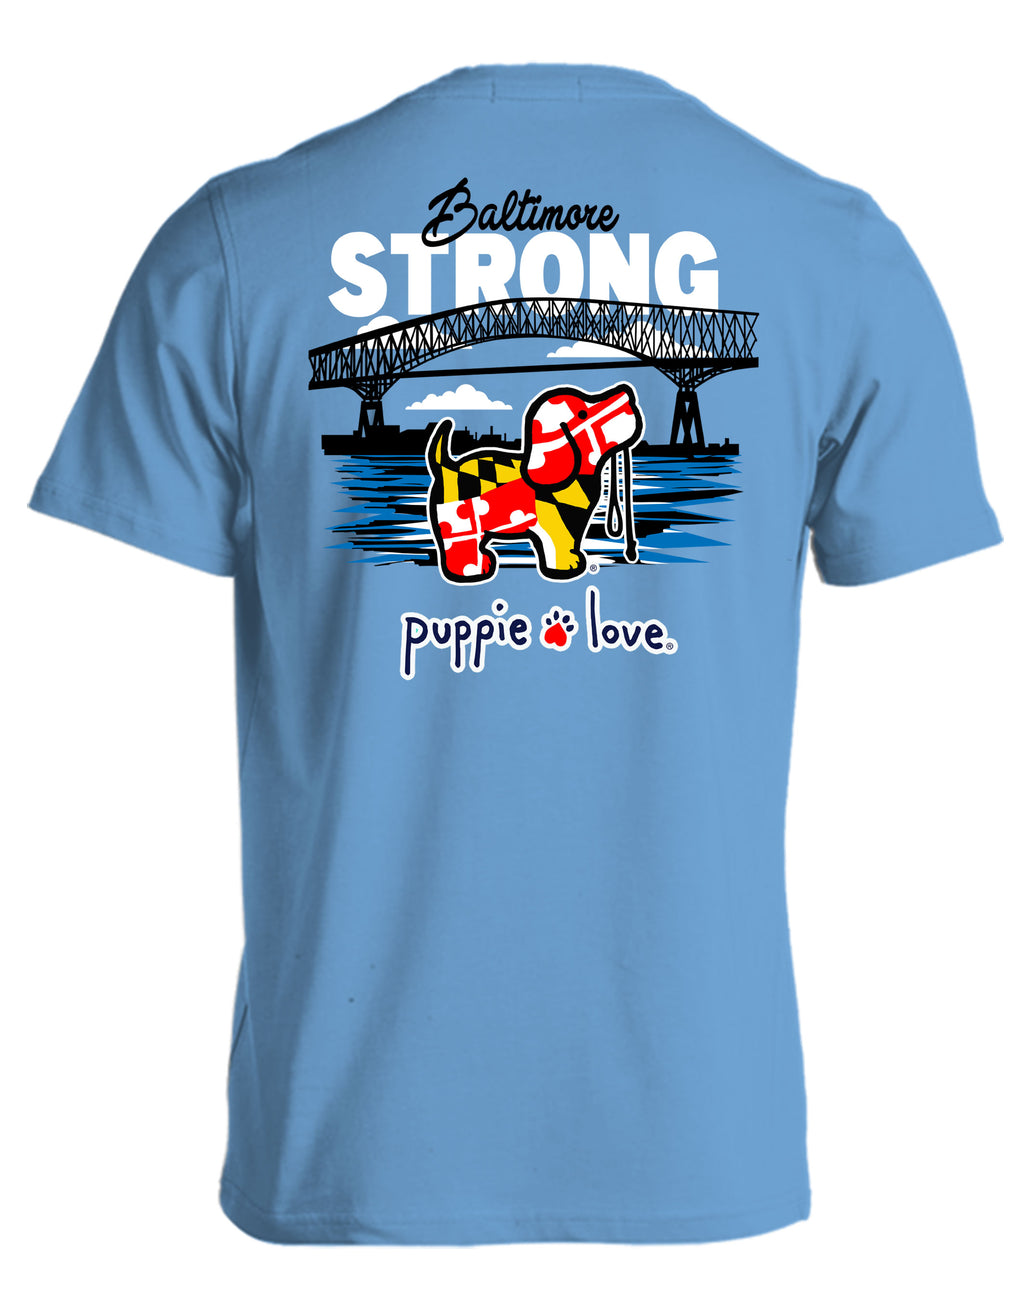 BALTIMORE STRONG PUP - Puppie Love